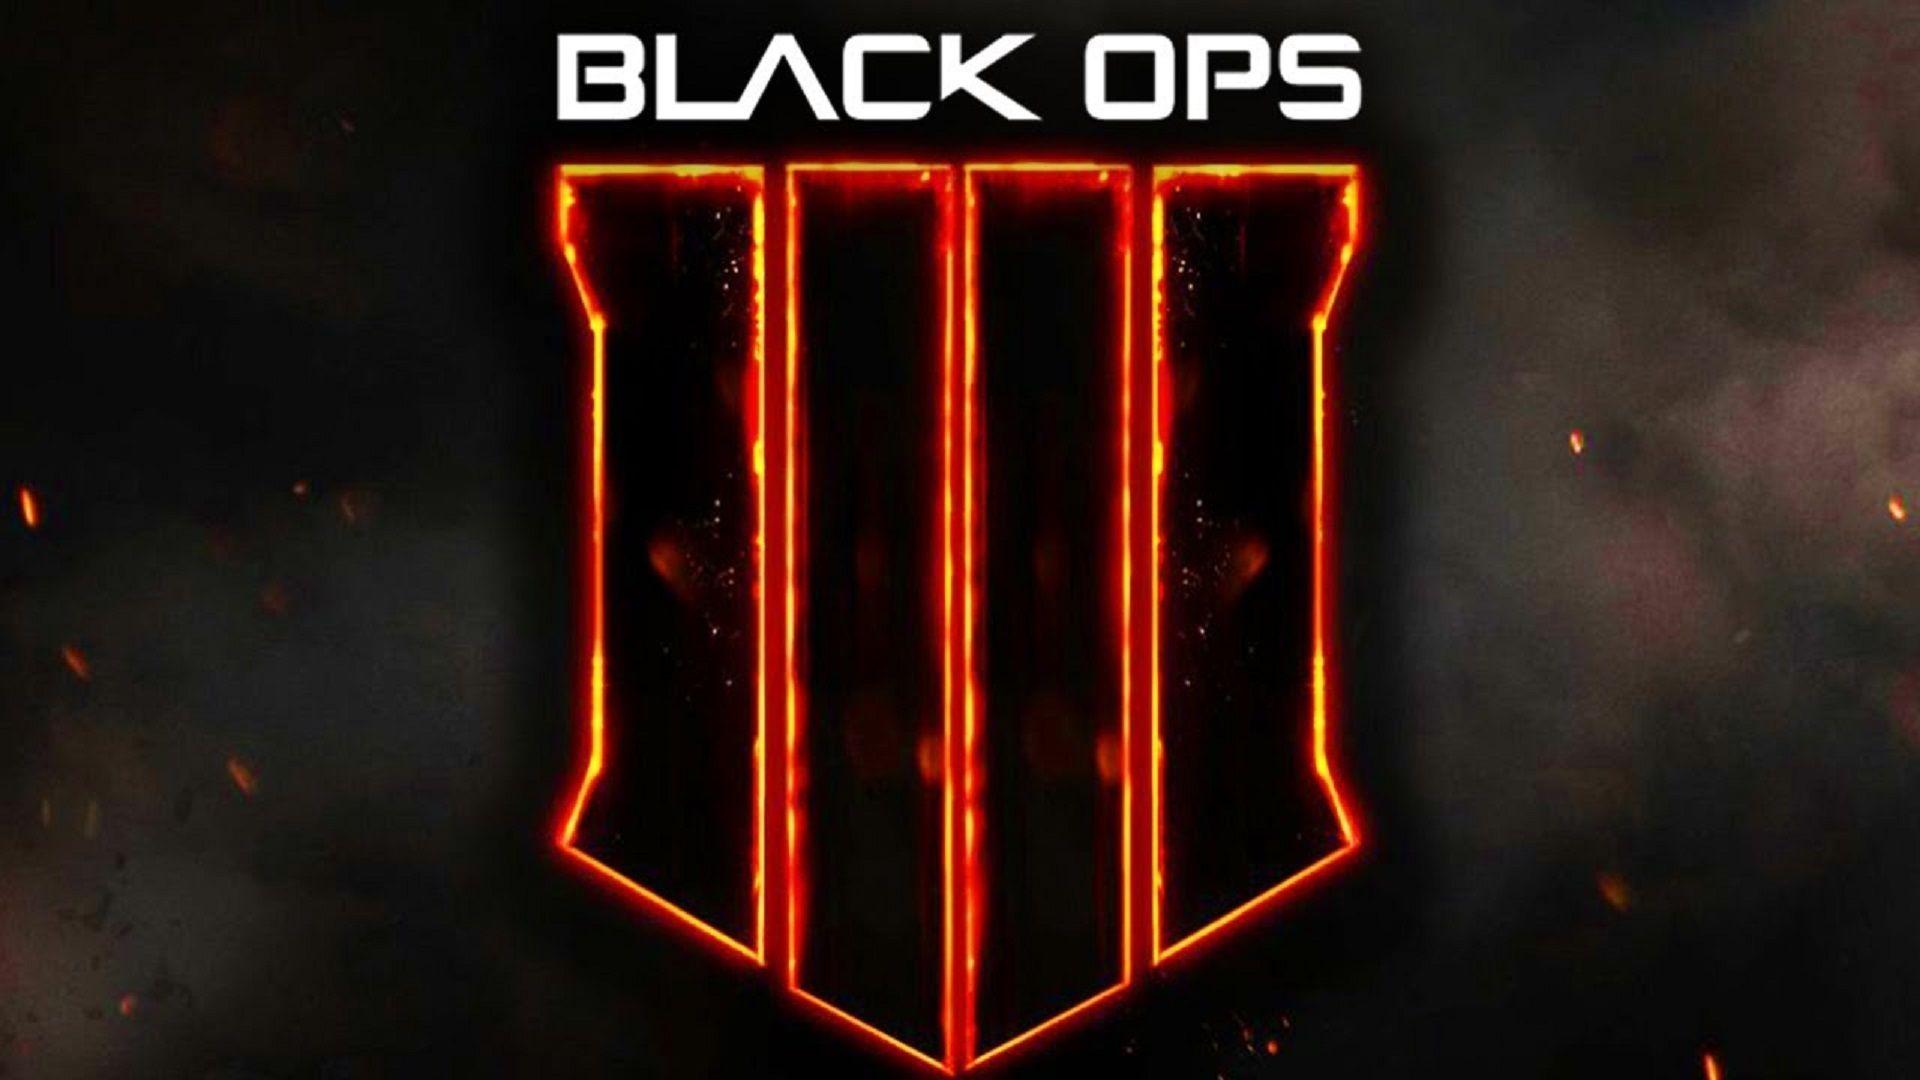 Call of Duty (COD) Black Ops 4 Wallpaper. Read games reviews, play